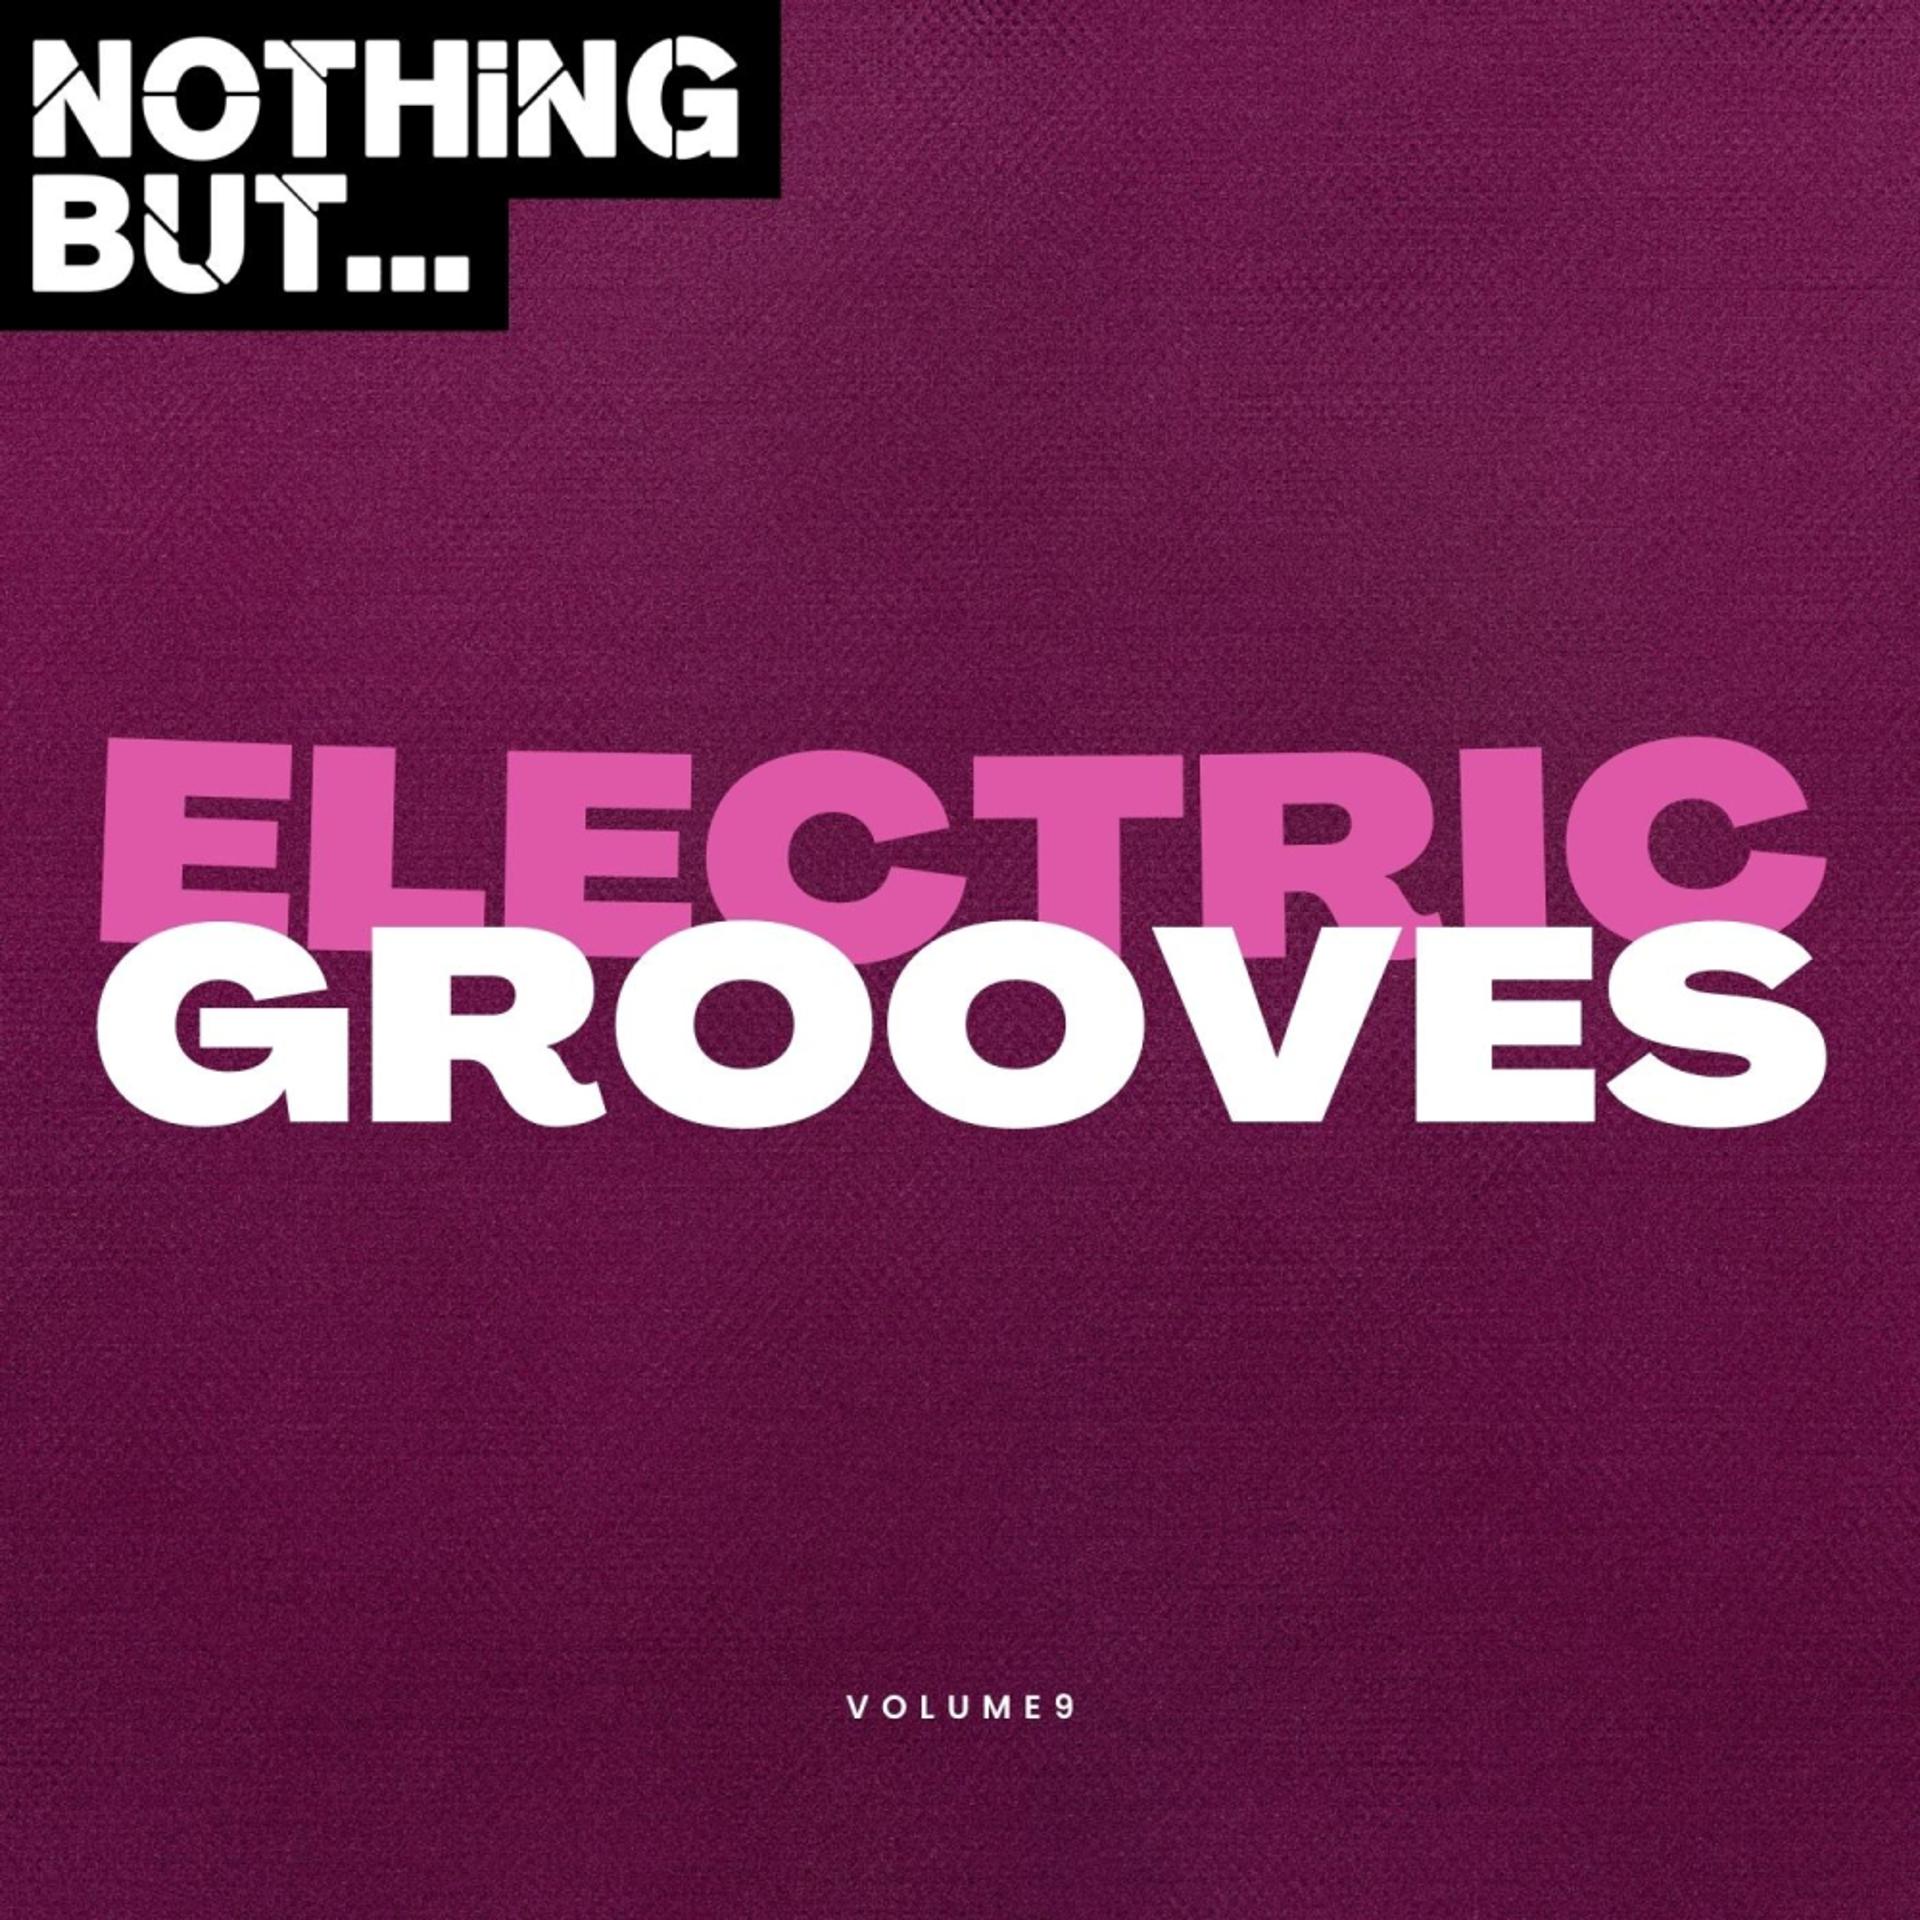 Постер альбома Nothing But... Electric Grooves, Vol. 09